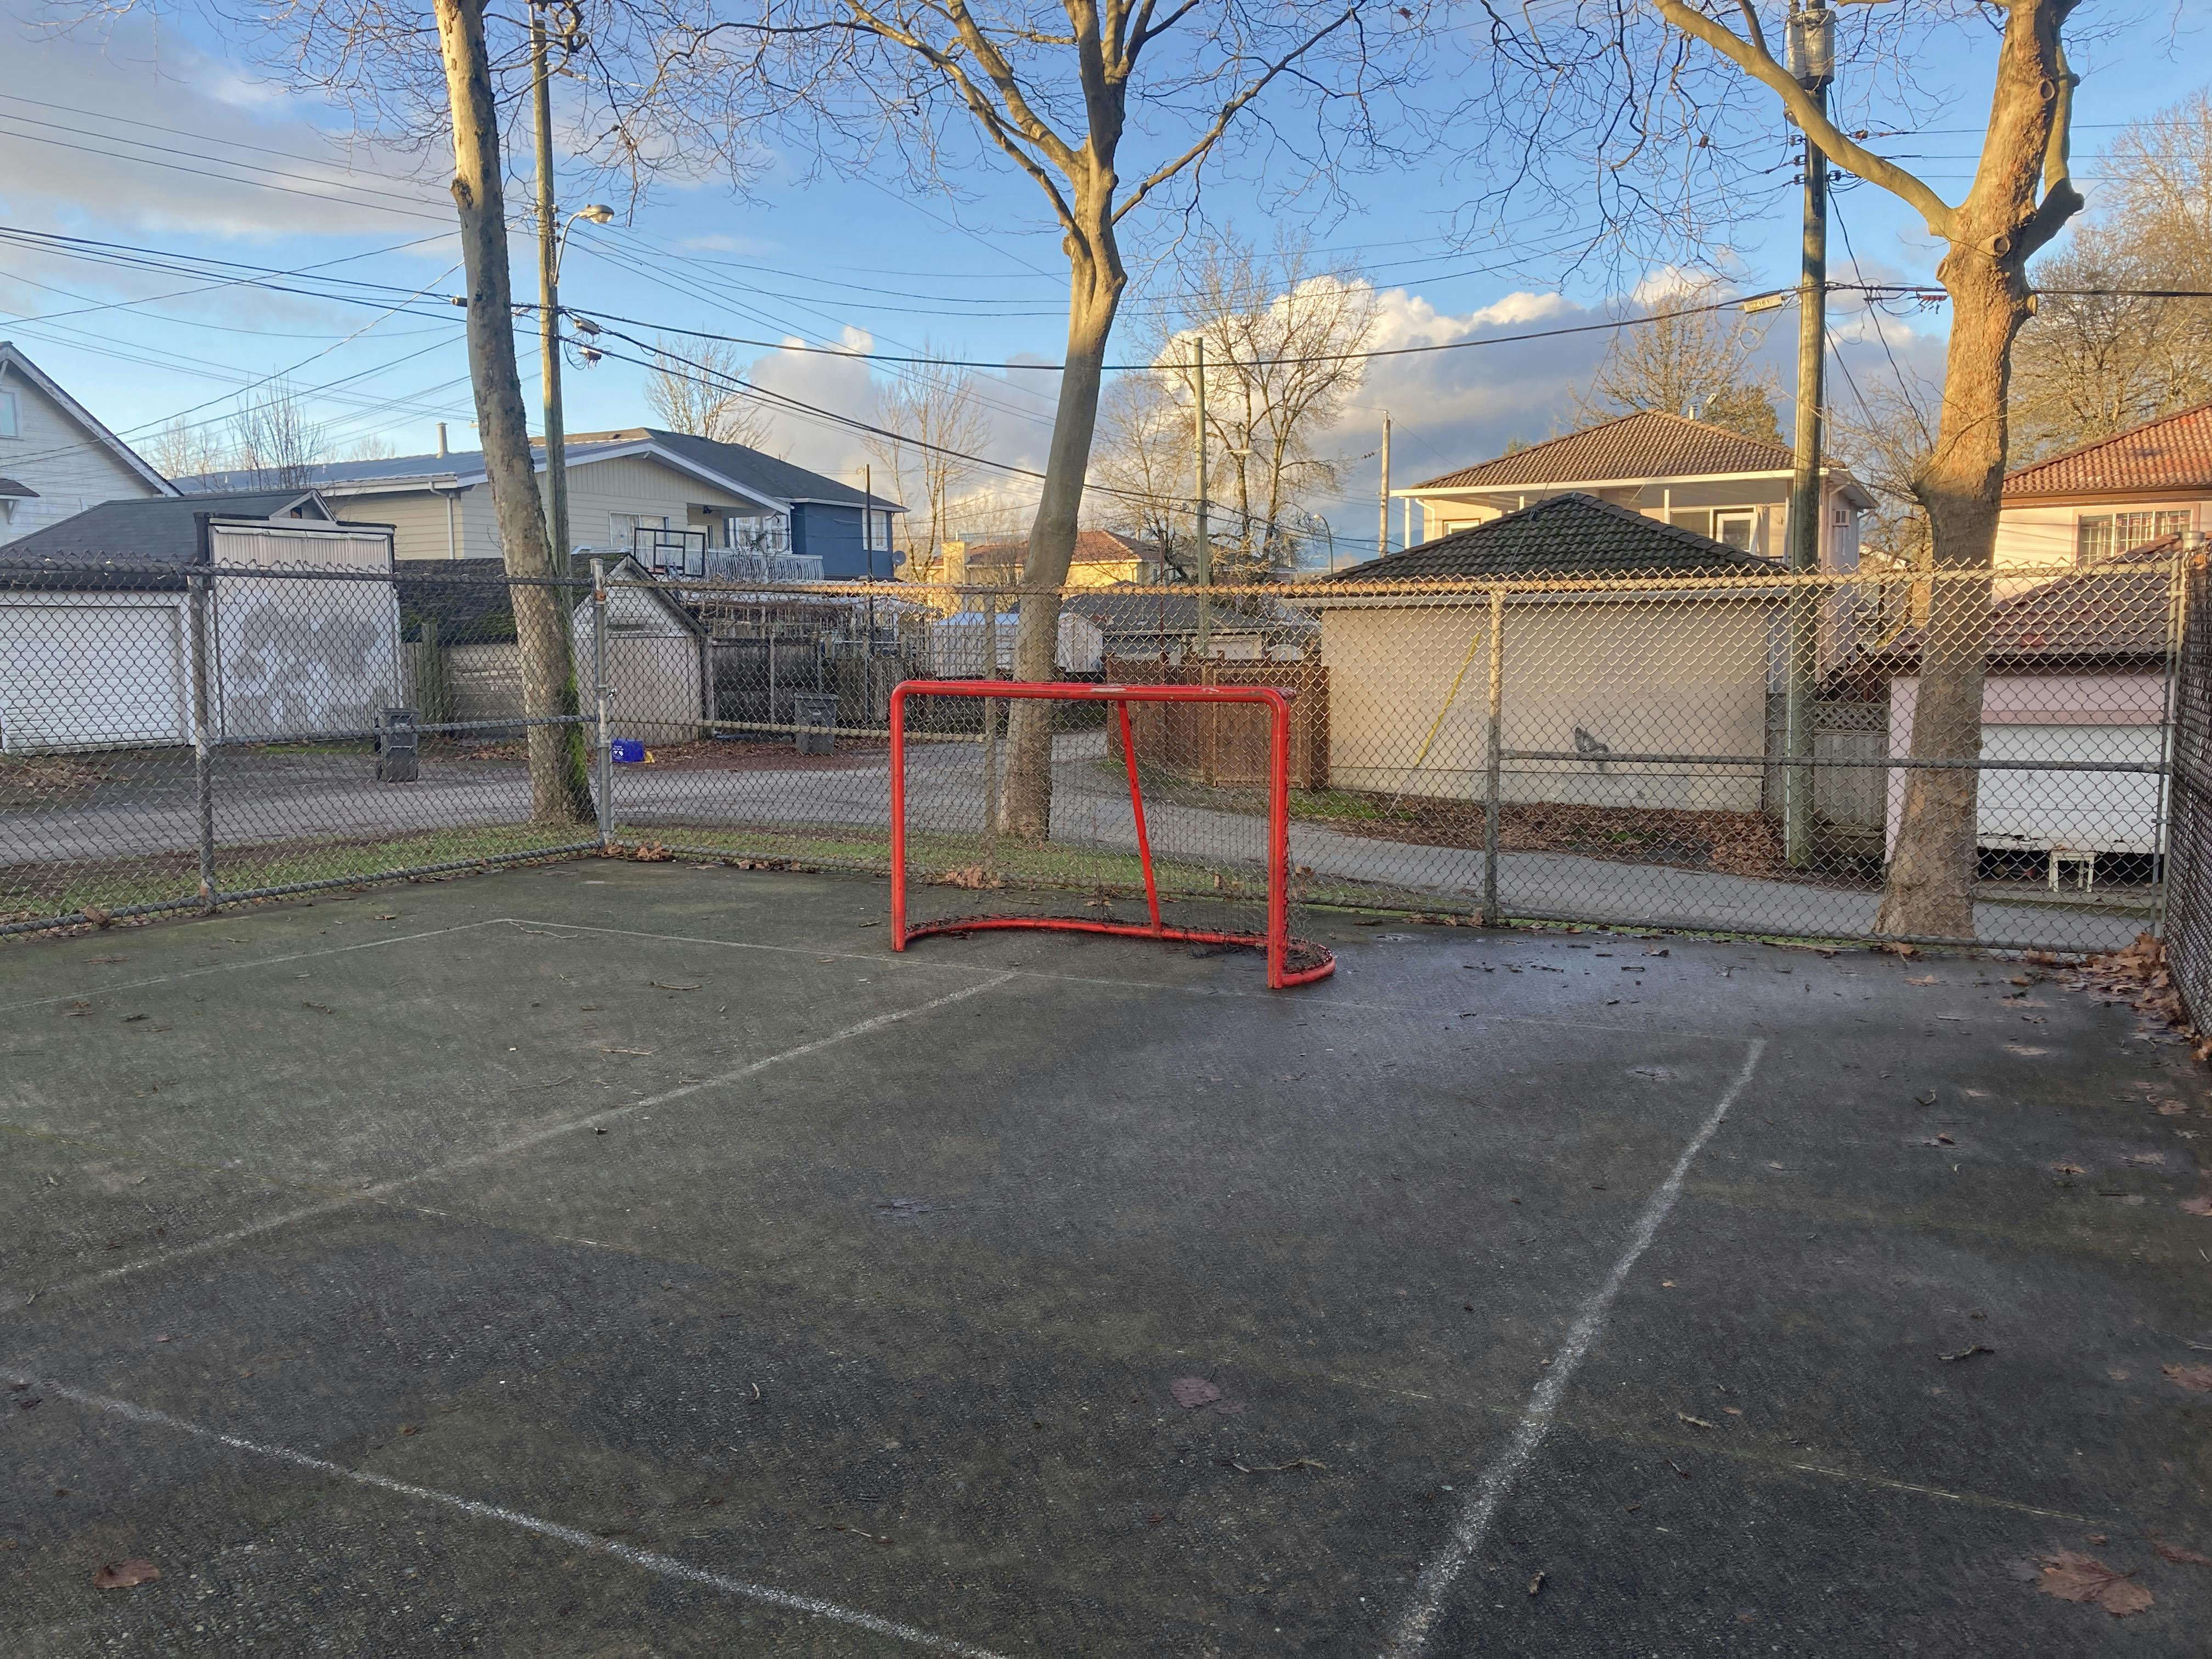 General Brock Park existing condition - ball hockey court 